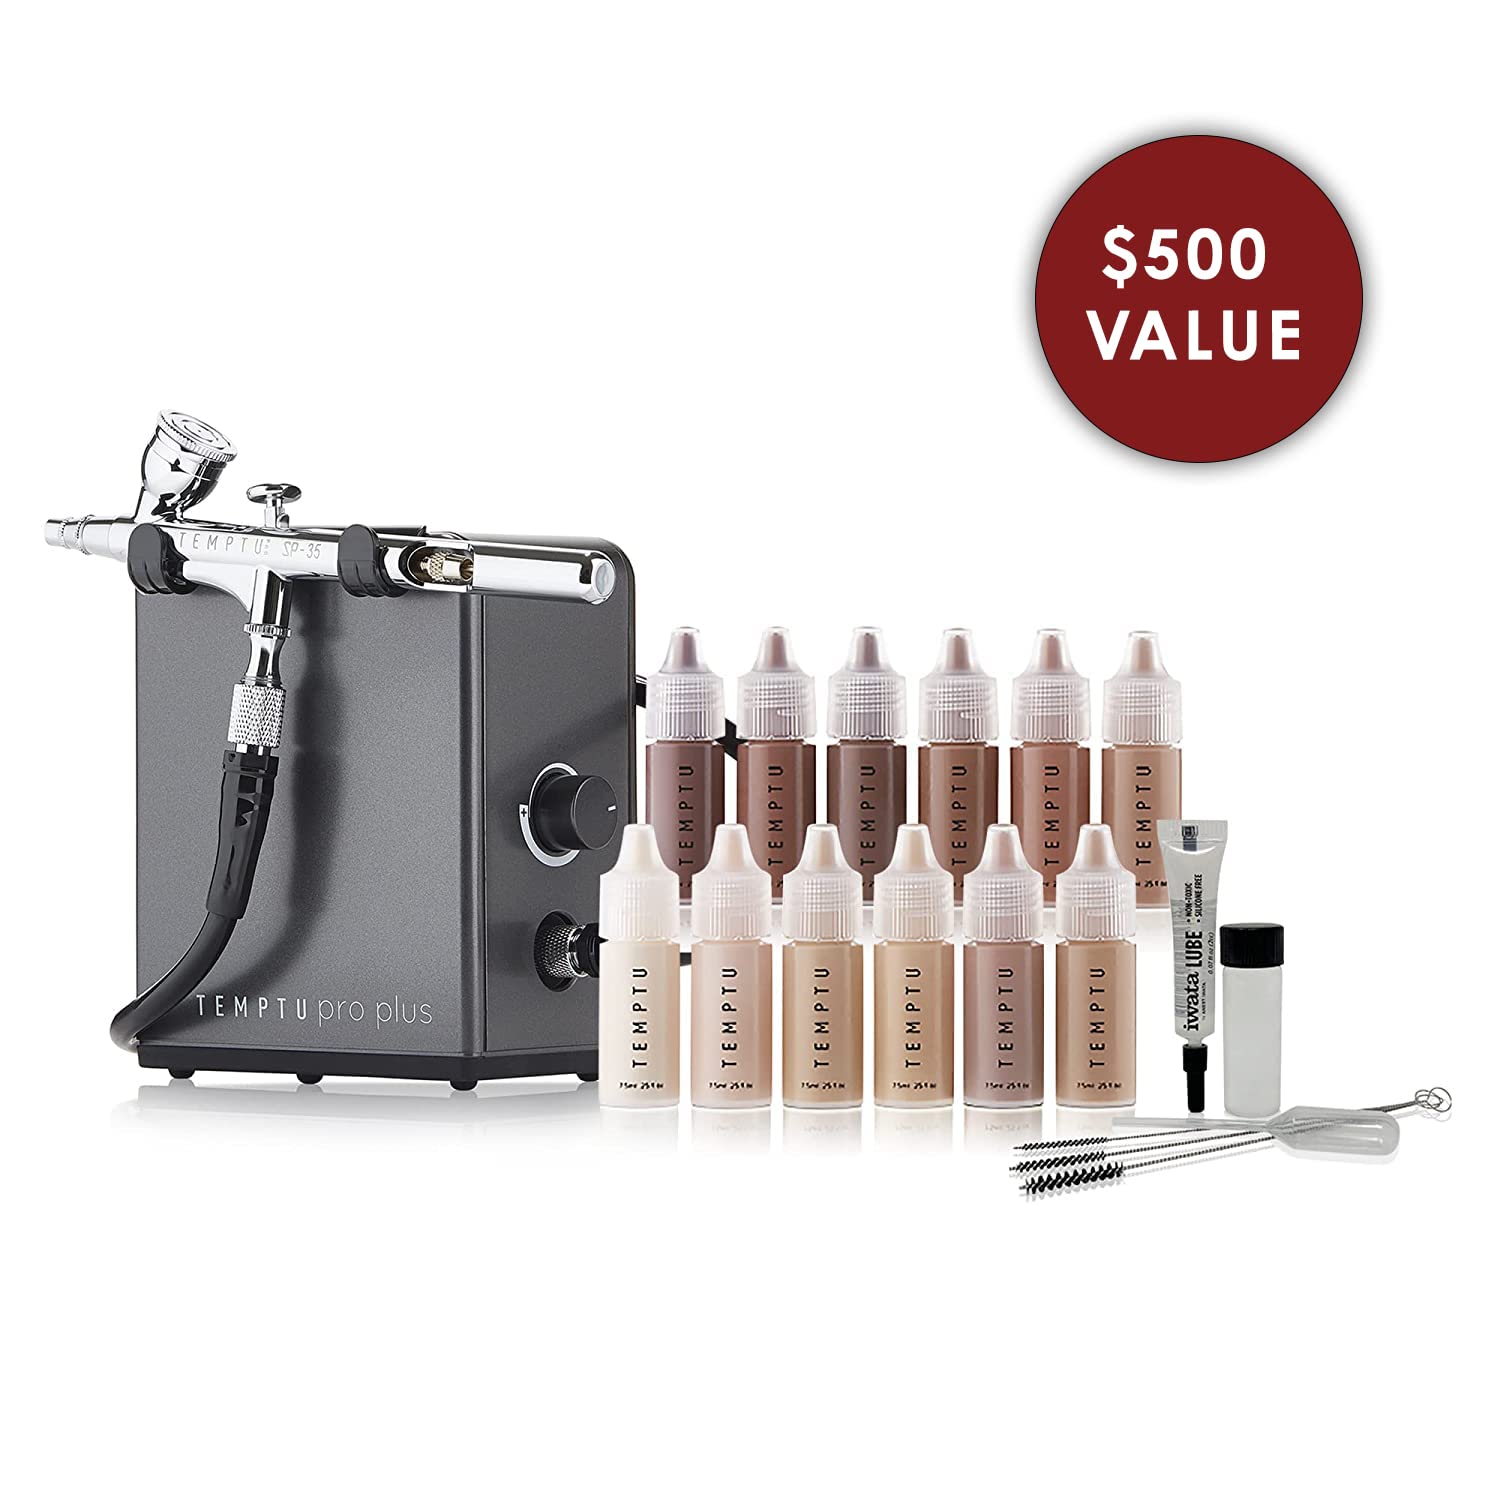 TEMPTU Airbrush Makeup System Pro Plus Kit: Airbrush Makeup Set for Professionals and Makeup Artists: Includes S/B Silicone-Based Foundation Starter Set & Cleaning Kit, Lightweight, Travel-Friendly